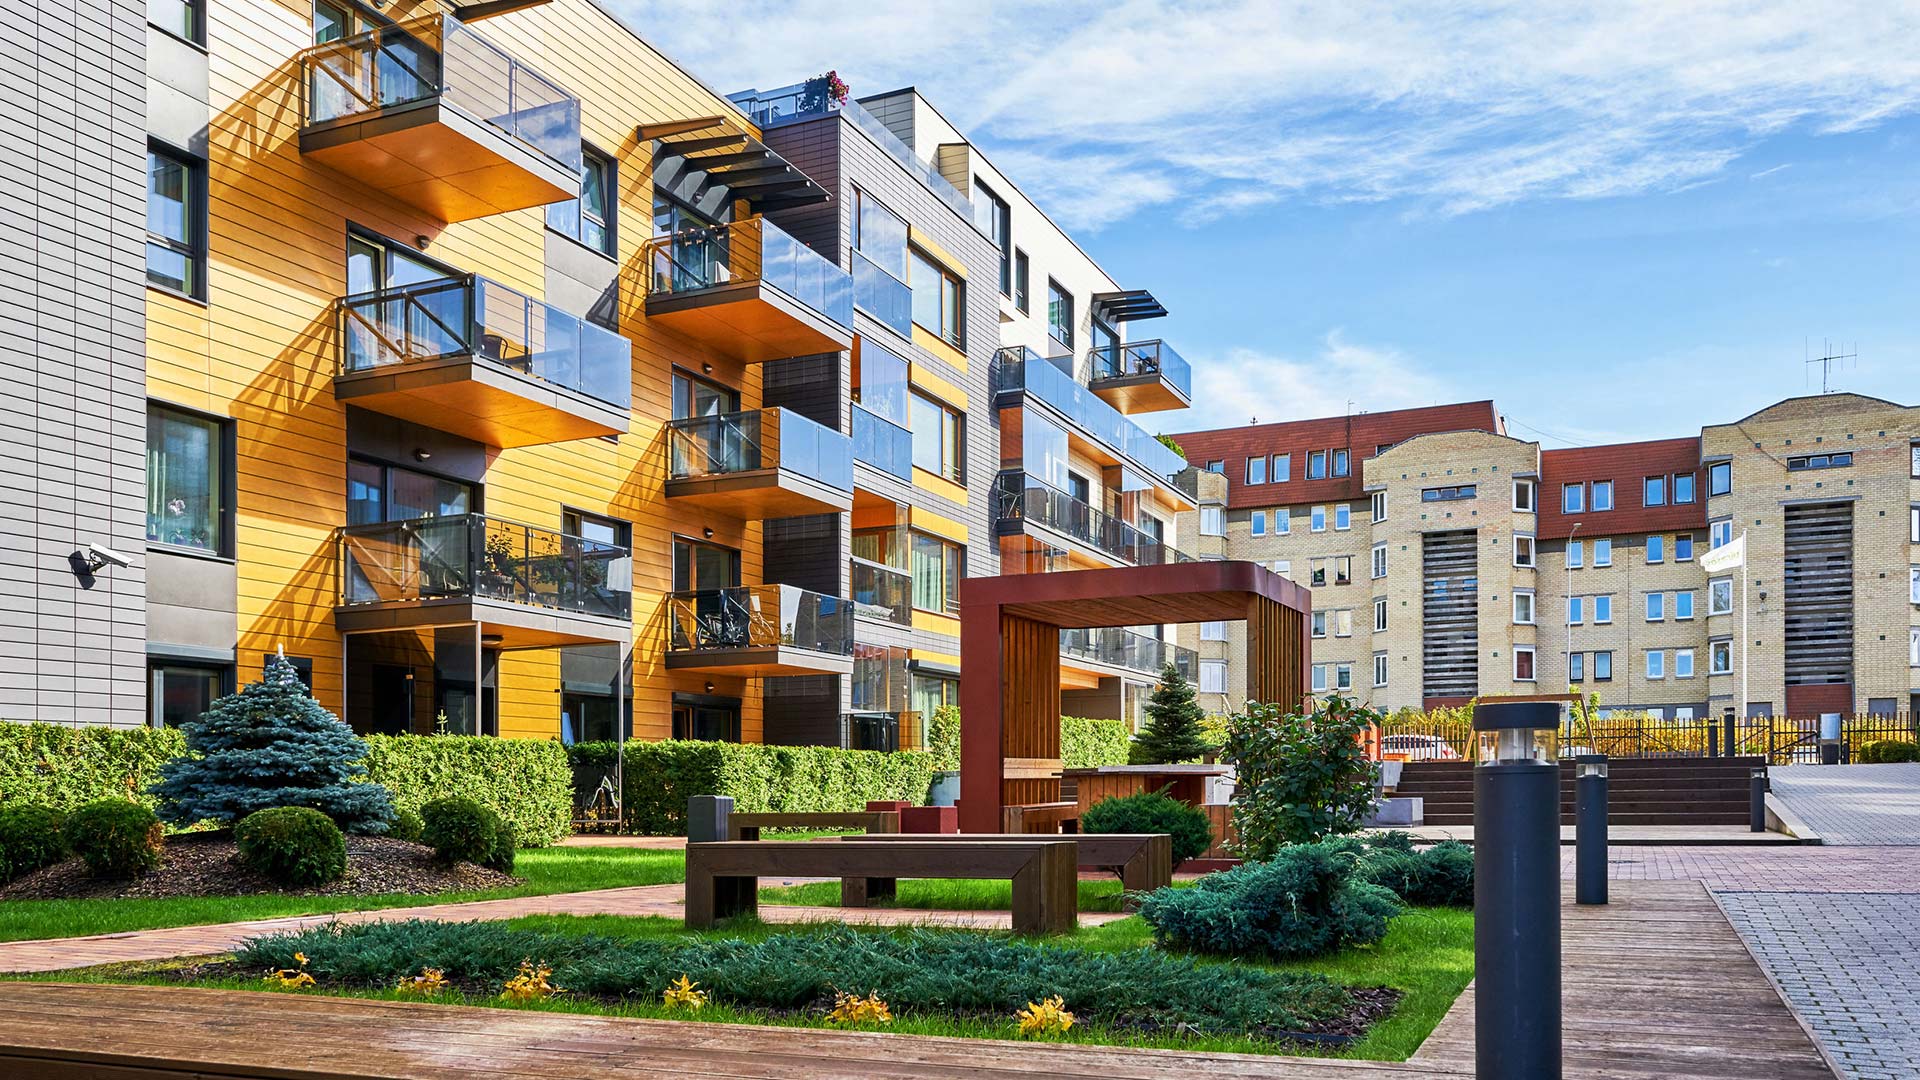 Buy Condos Like an Expert: 4 Things to Consider